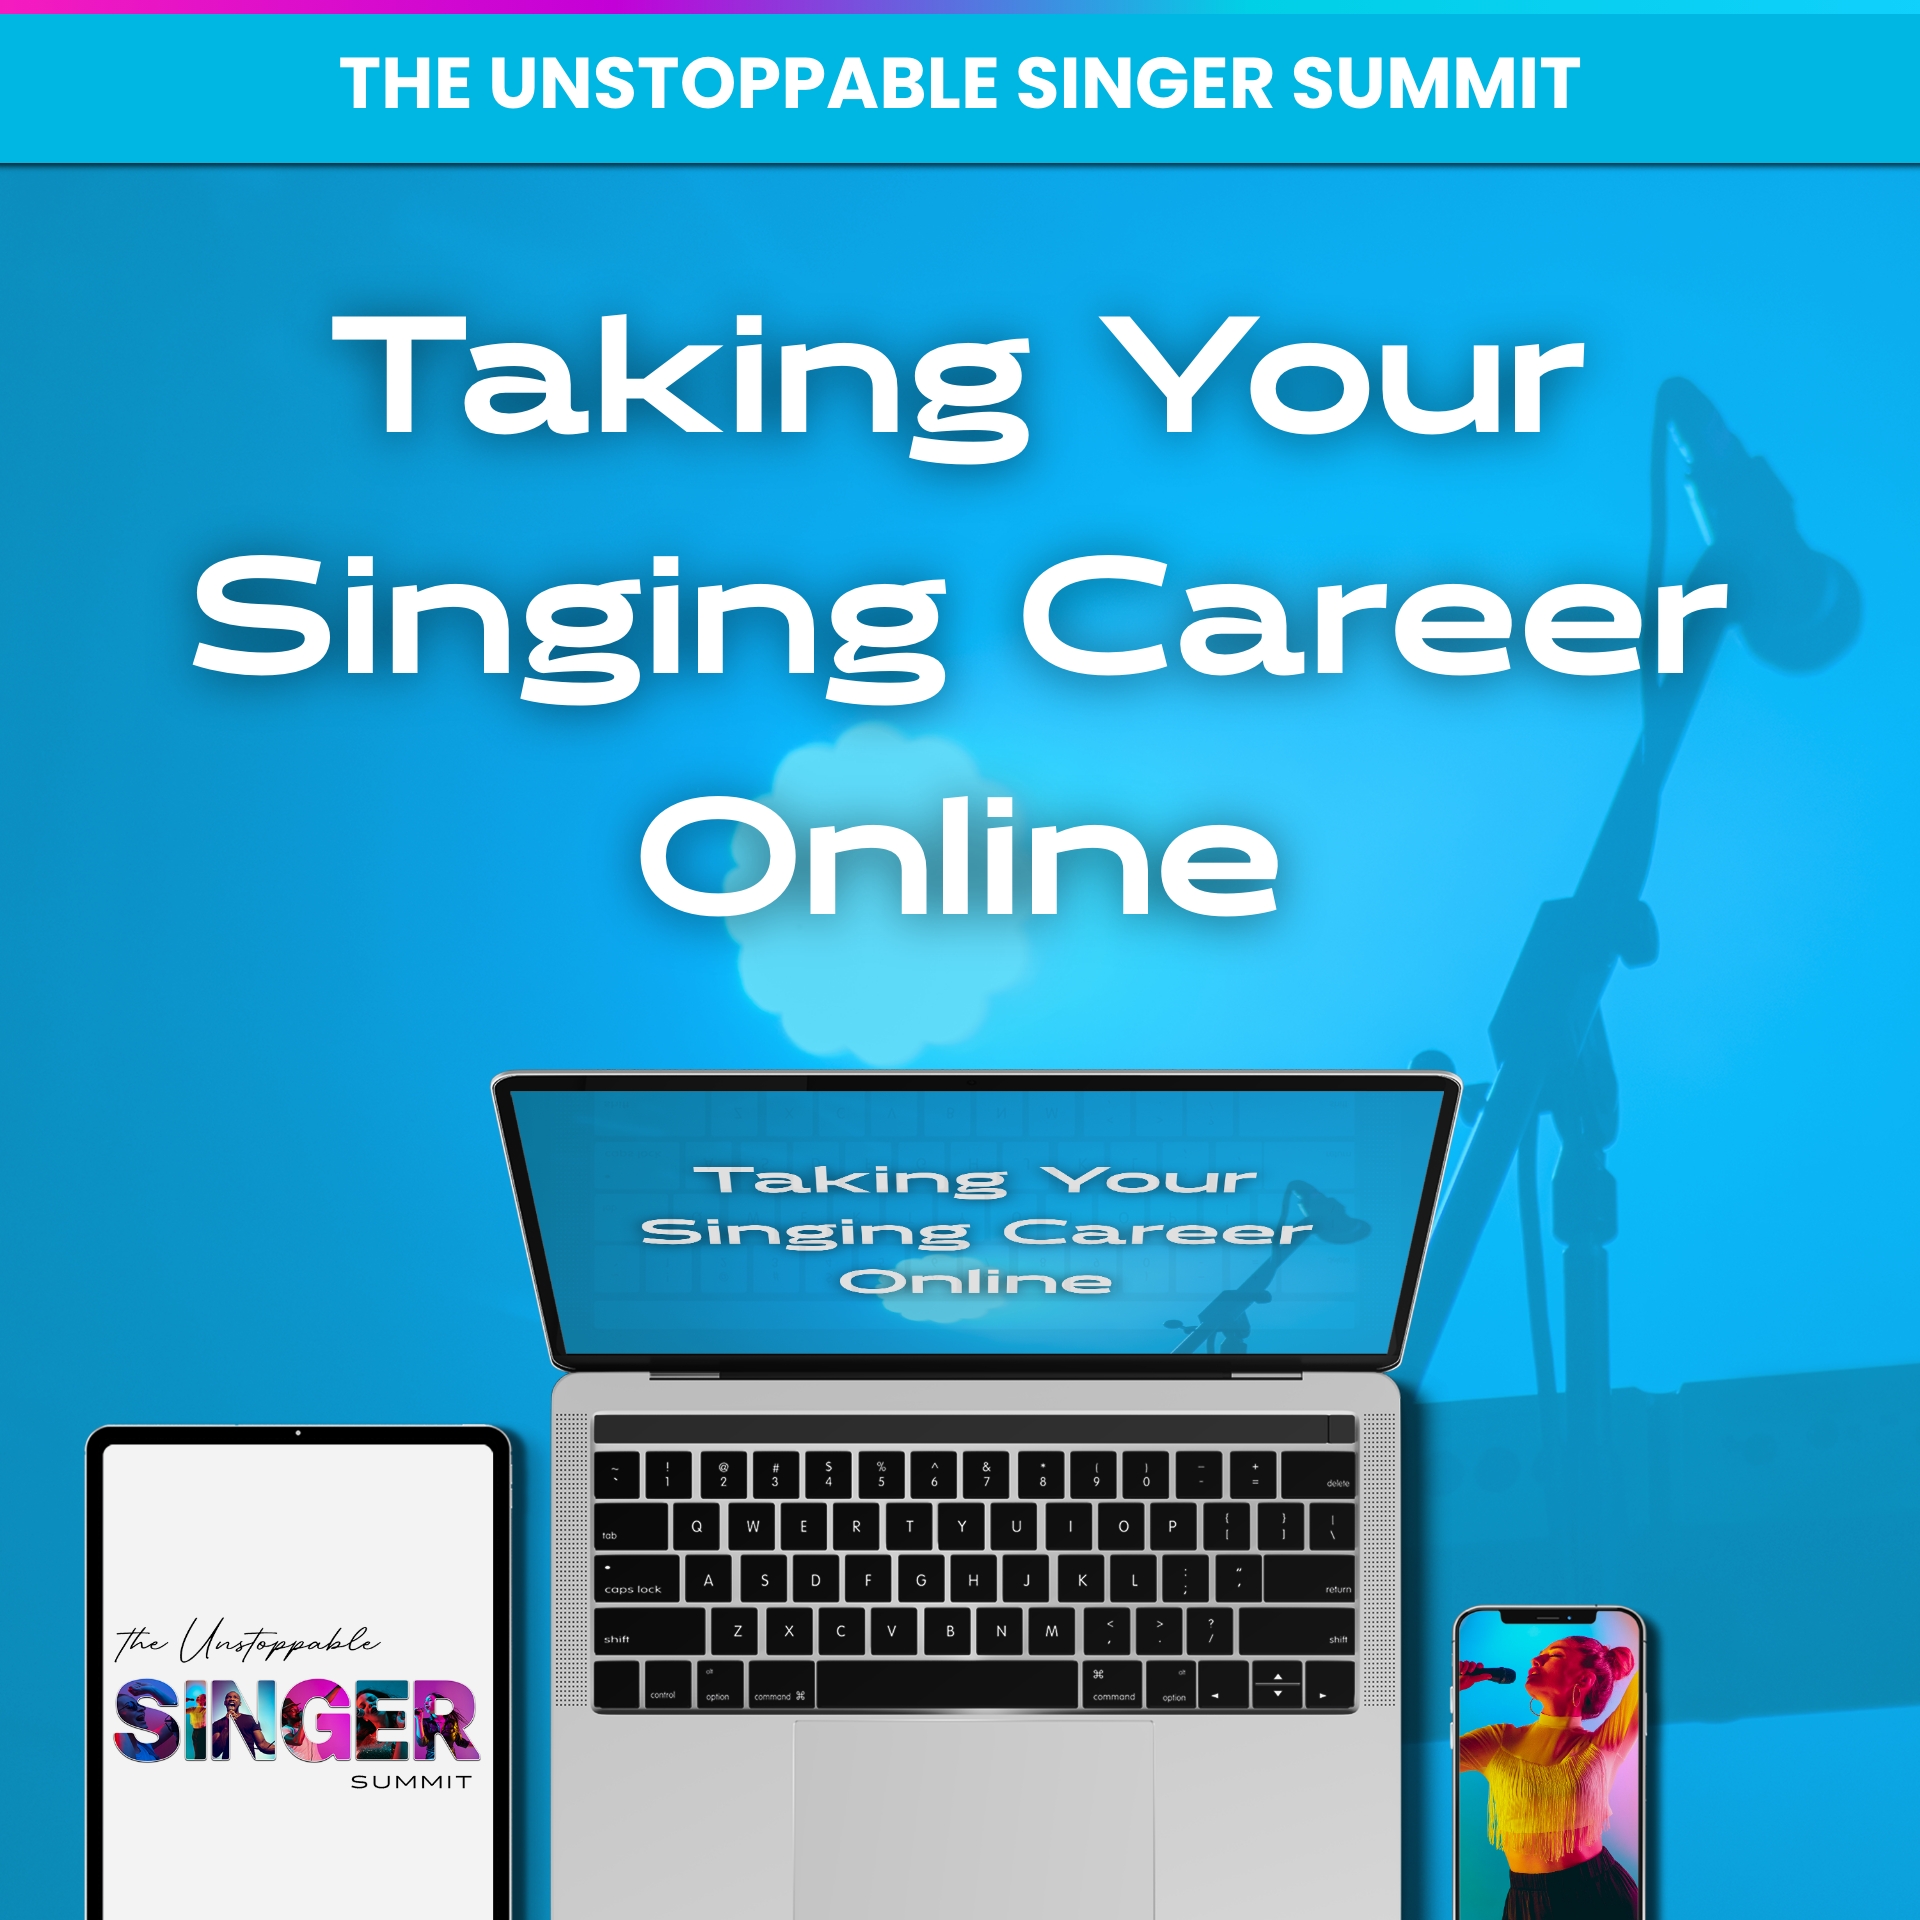 Taking Your Singing Career Online - The Unstoppable Singer Summit